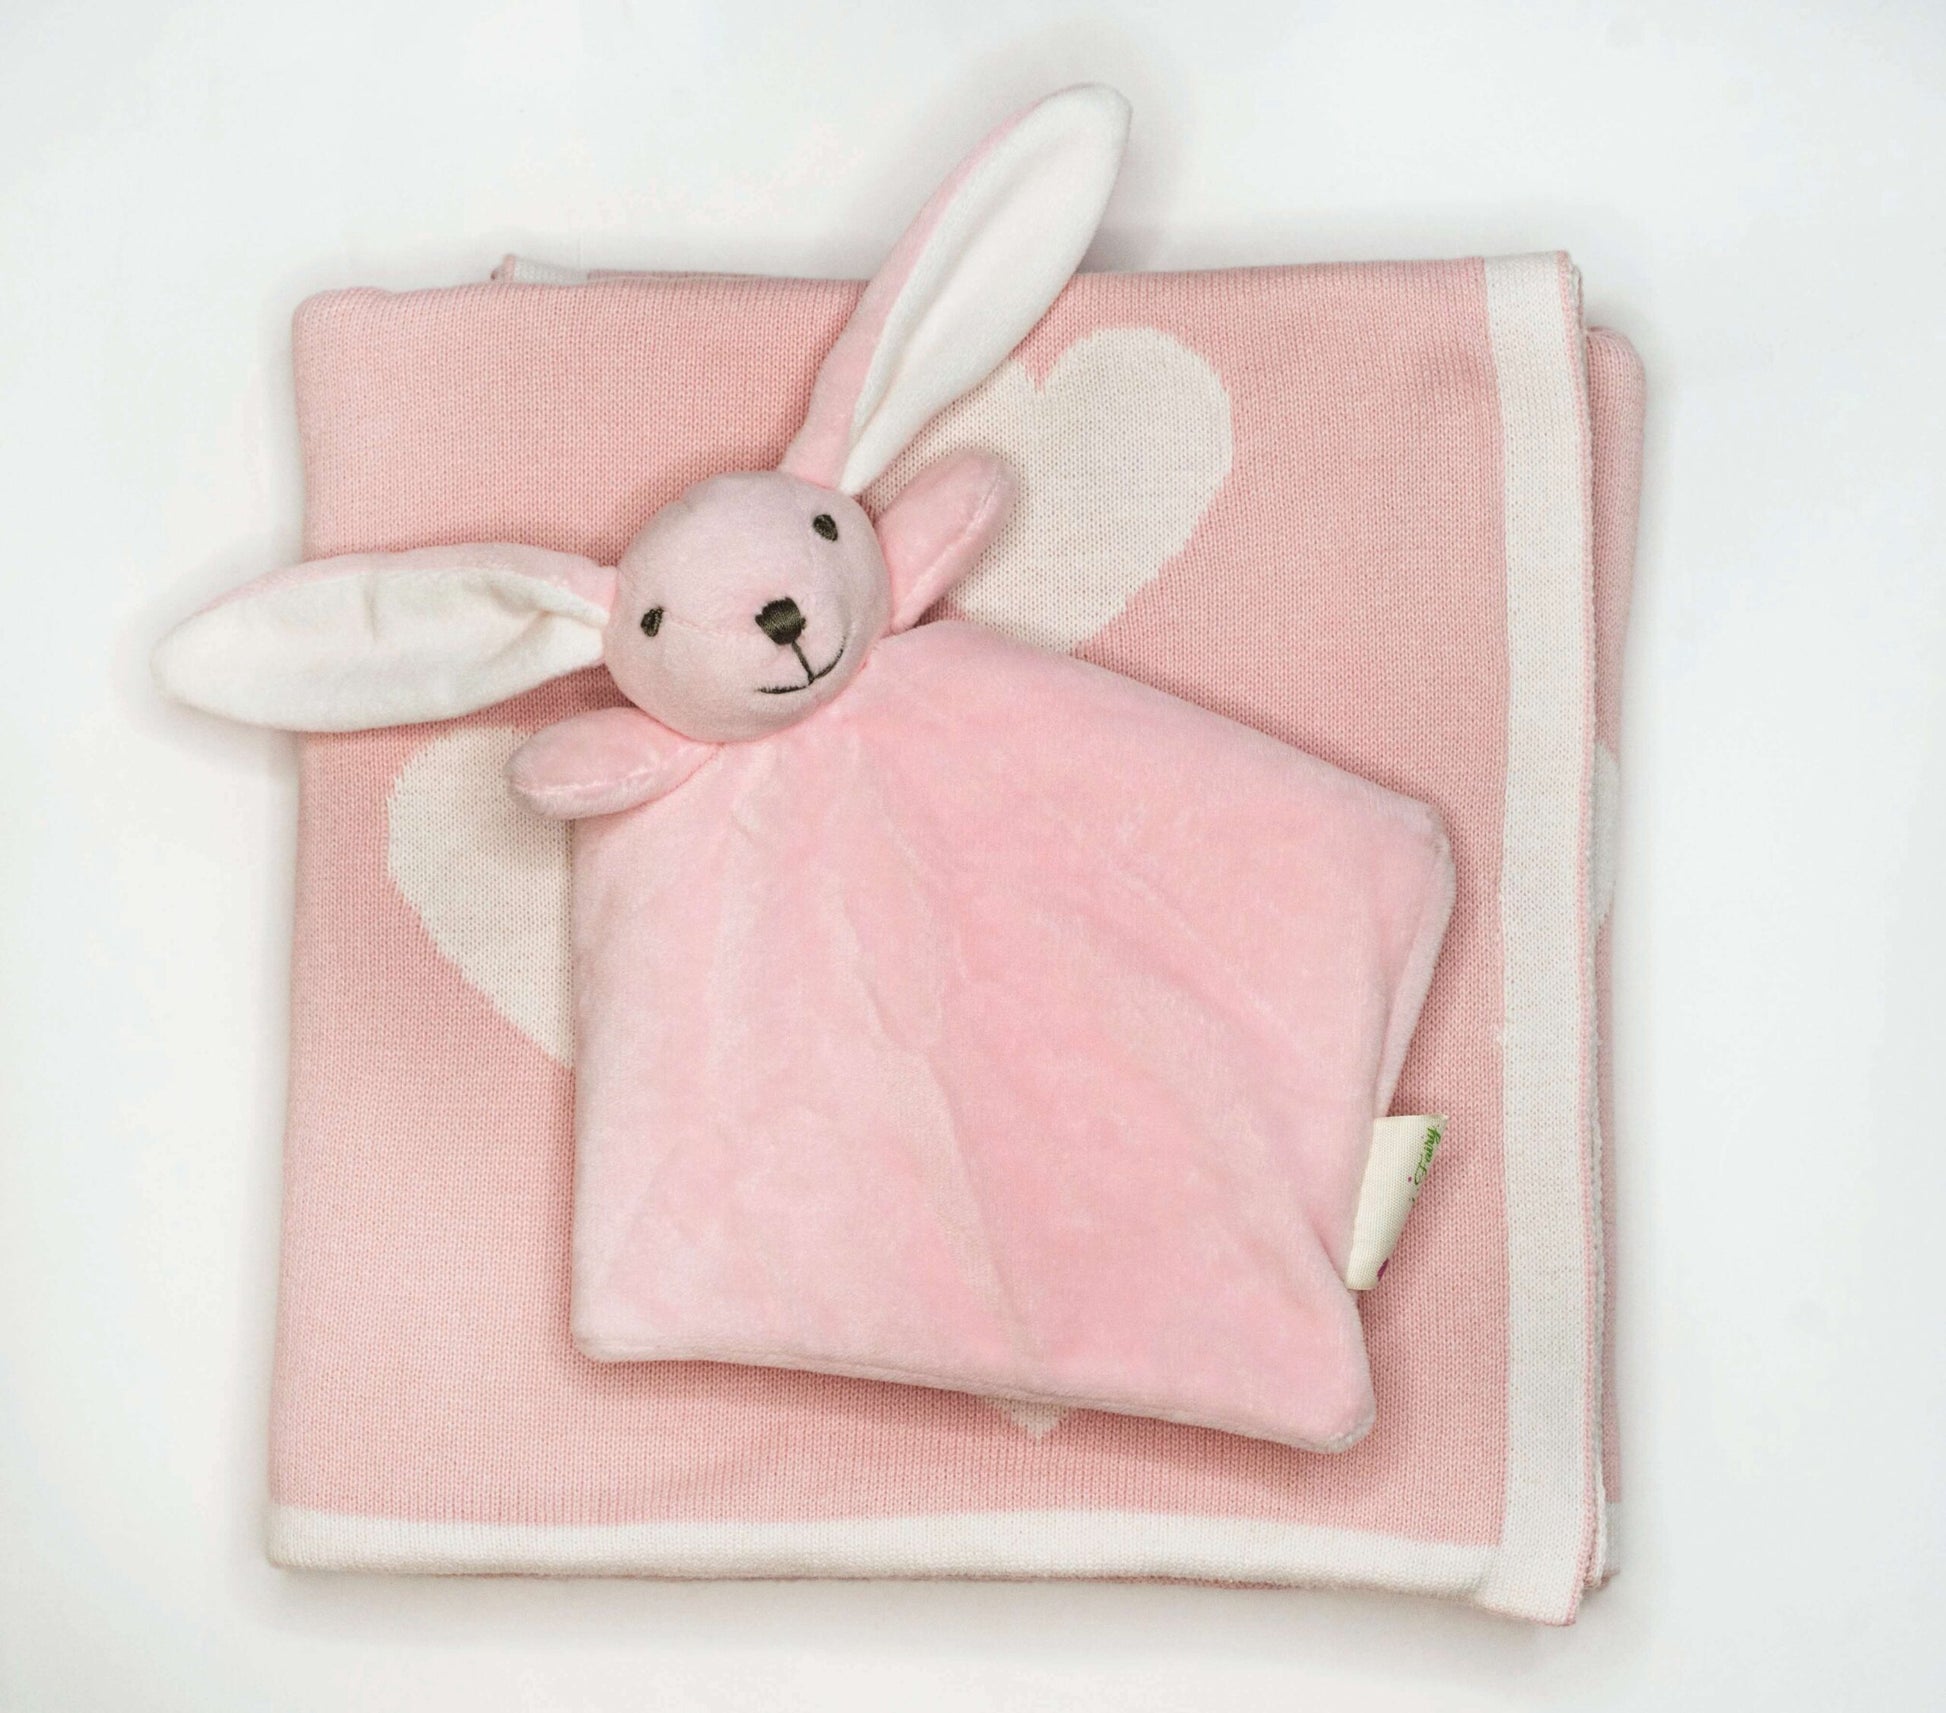 Premium Baby Heart Blanket with Plush toy